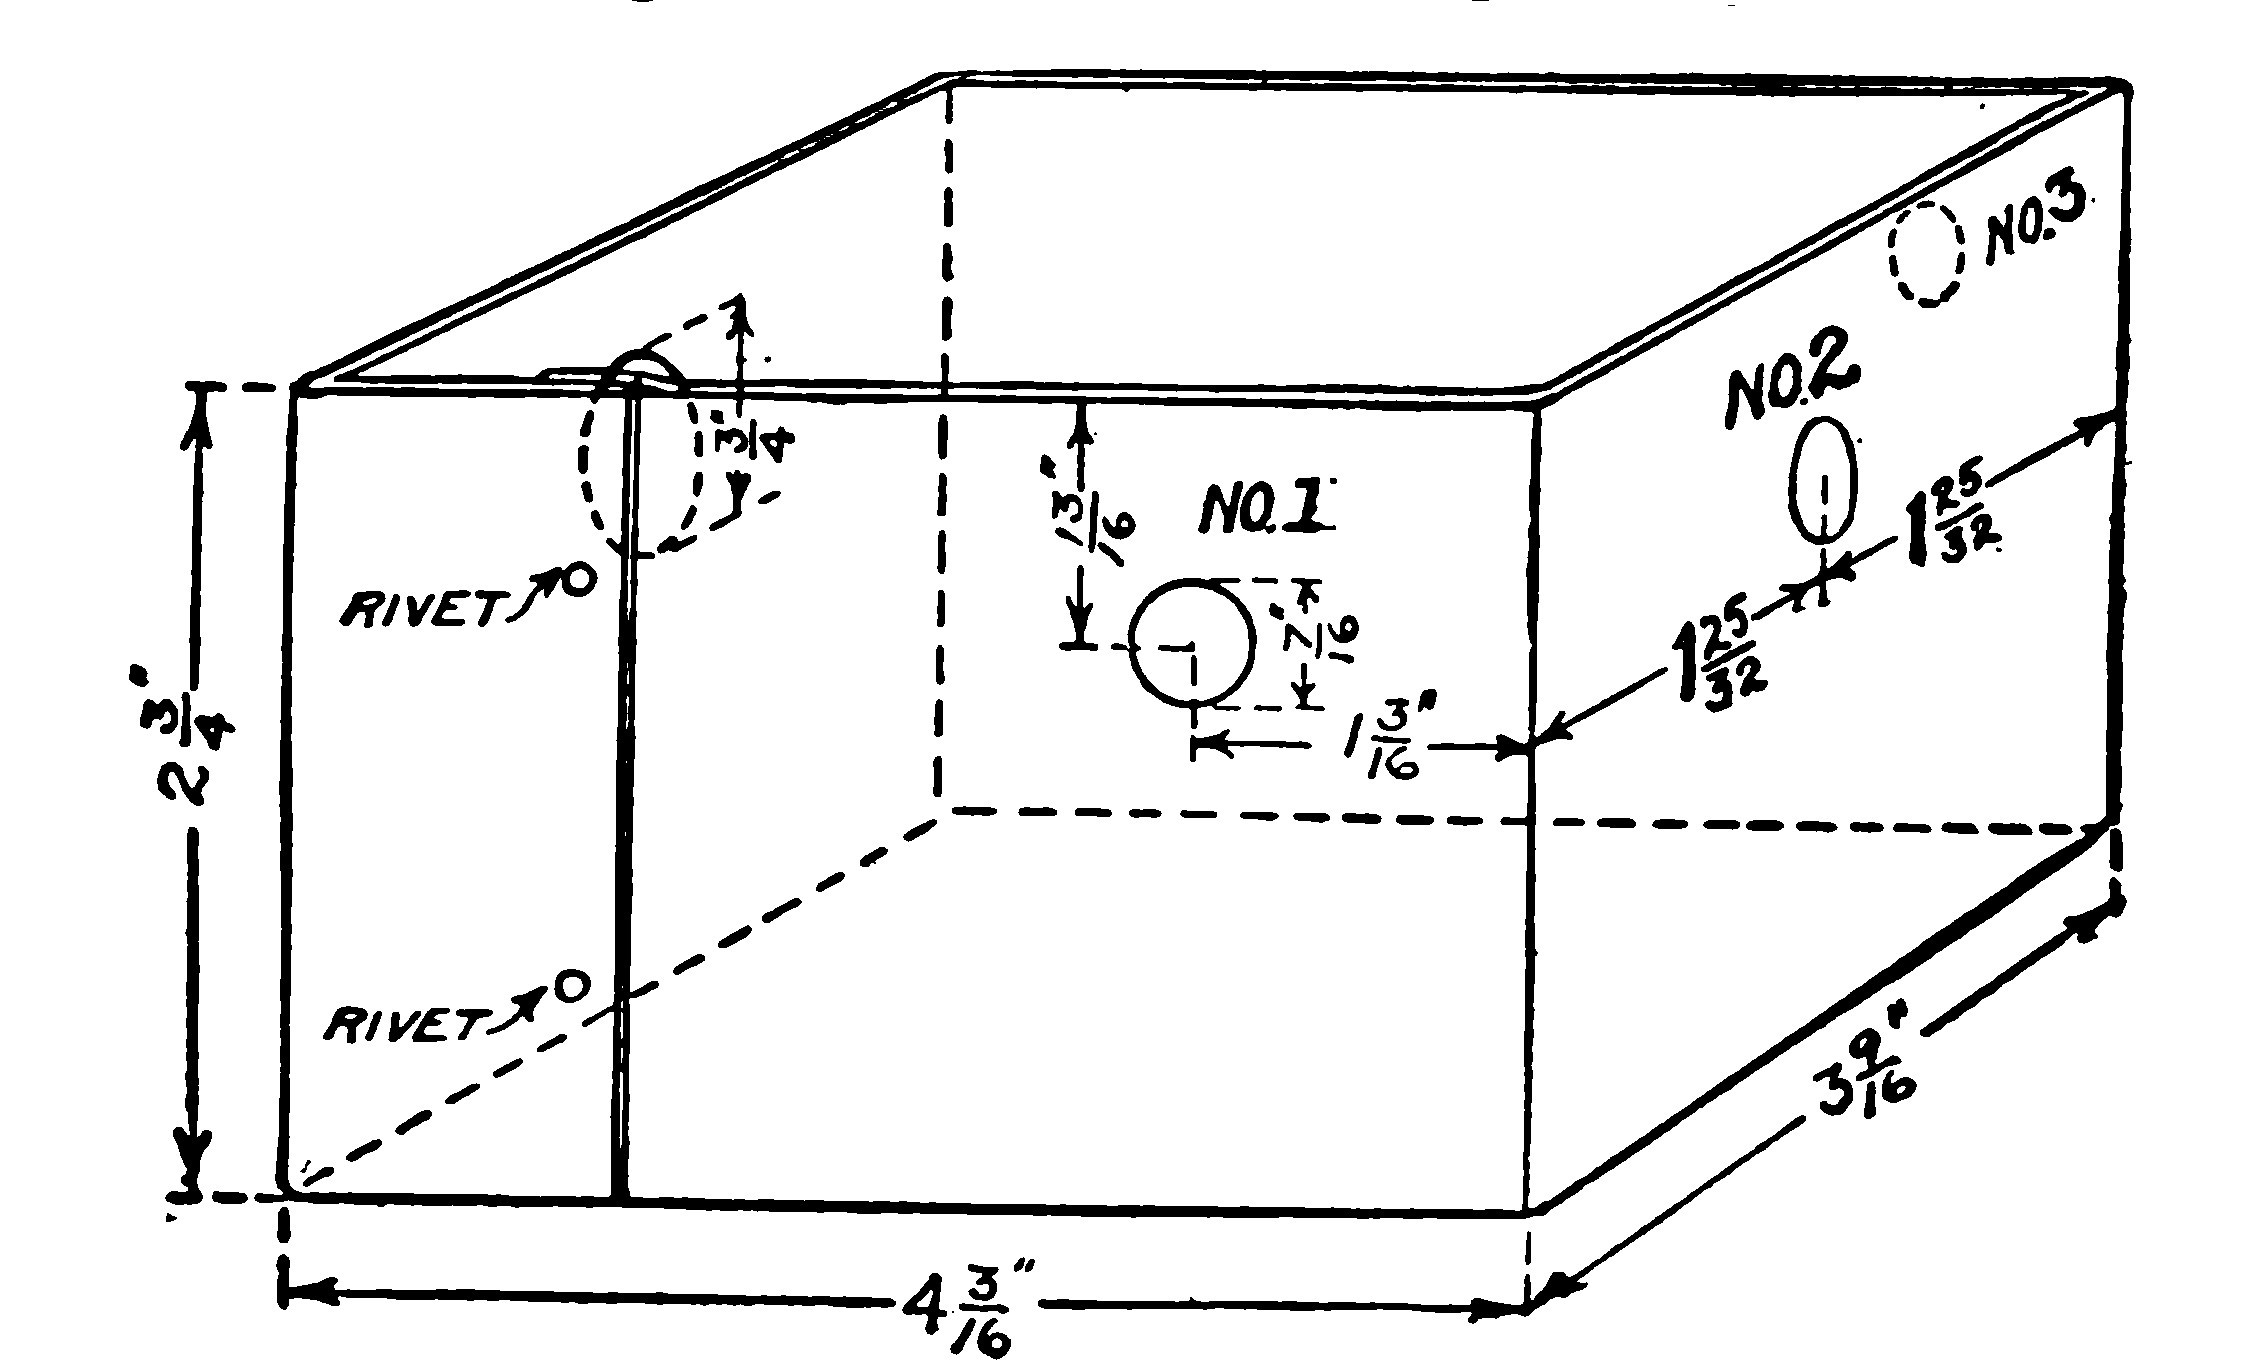 FIG. 64.—A detailed Drawing showing how the Sides of the Case are formed by bending a long strip of Sheet Iron at four points.